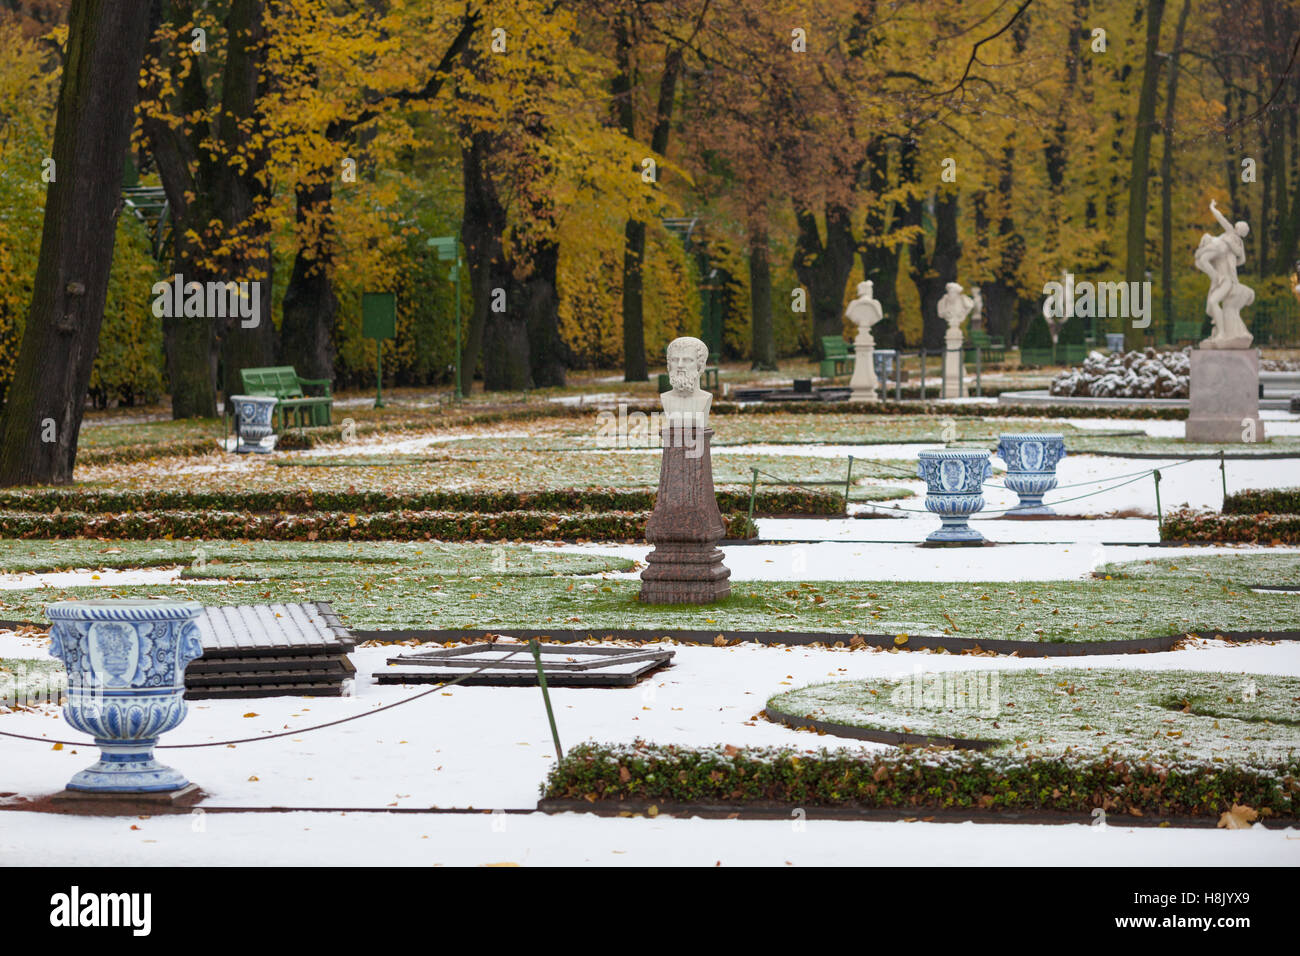 View on Ceremonial parterre in Summer Garden after the first snowfall, St. Petersburg, Russia Stock Photo